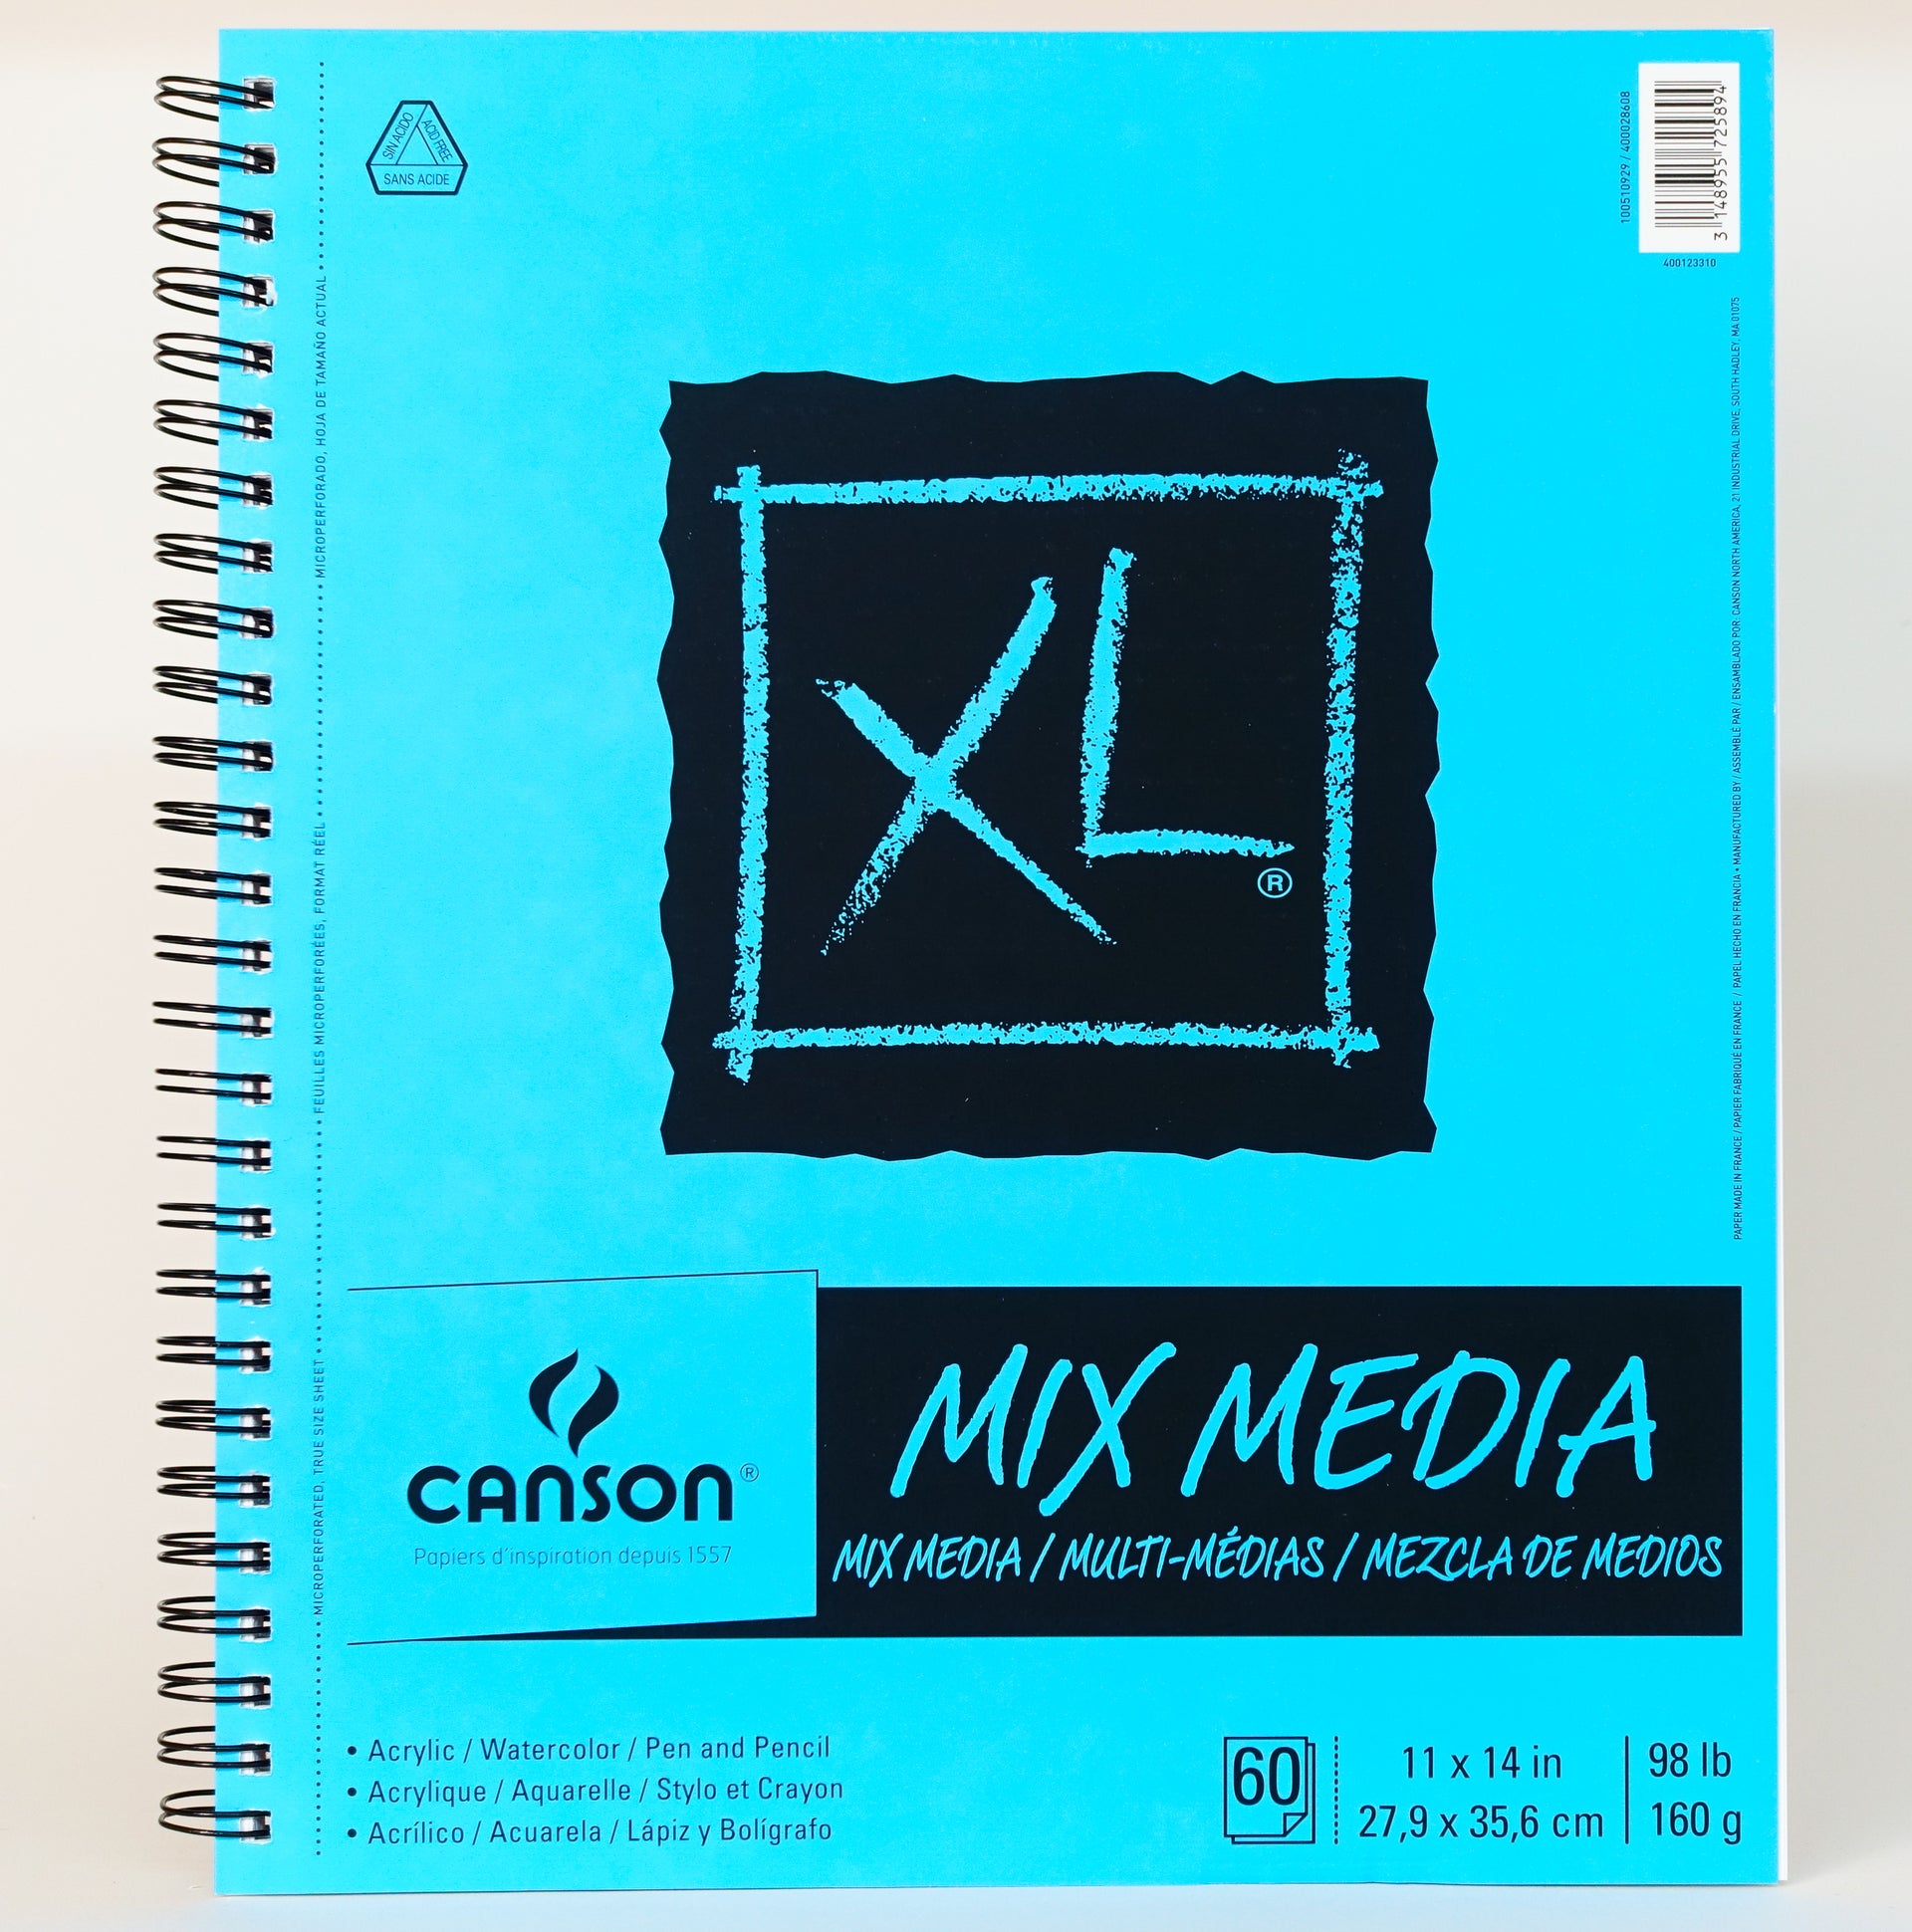 Canson Mixed media Sketchbook tour #2 2017 (EmilyArts) 